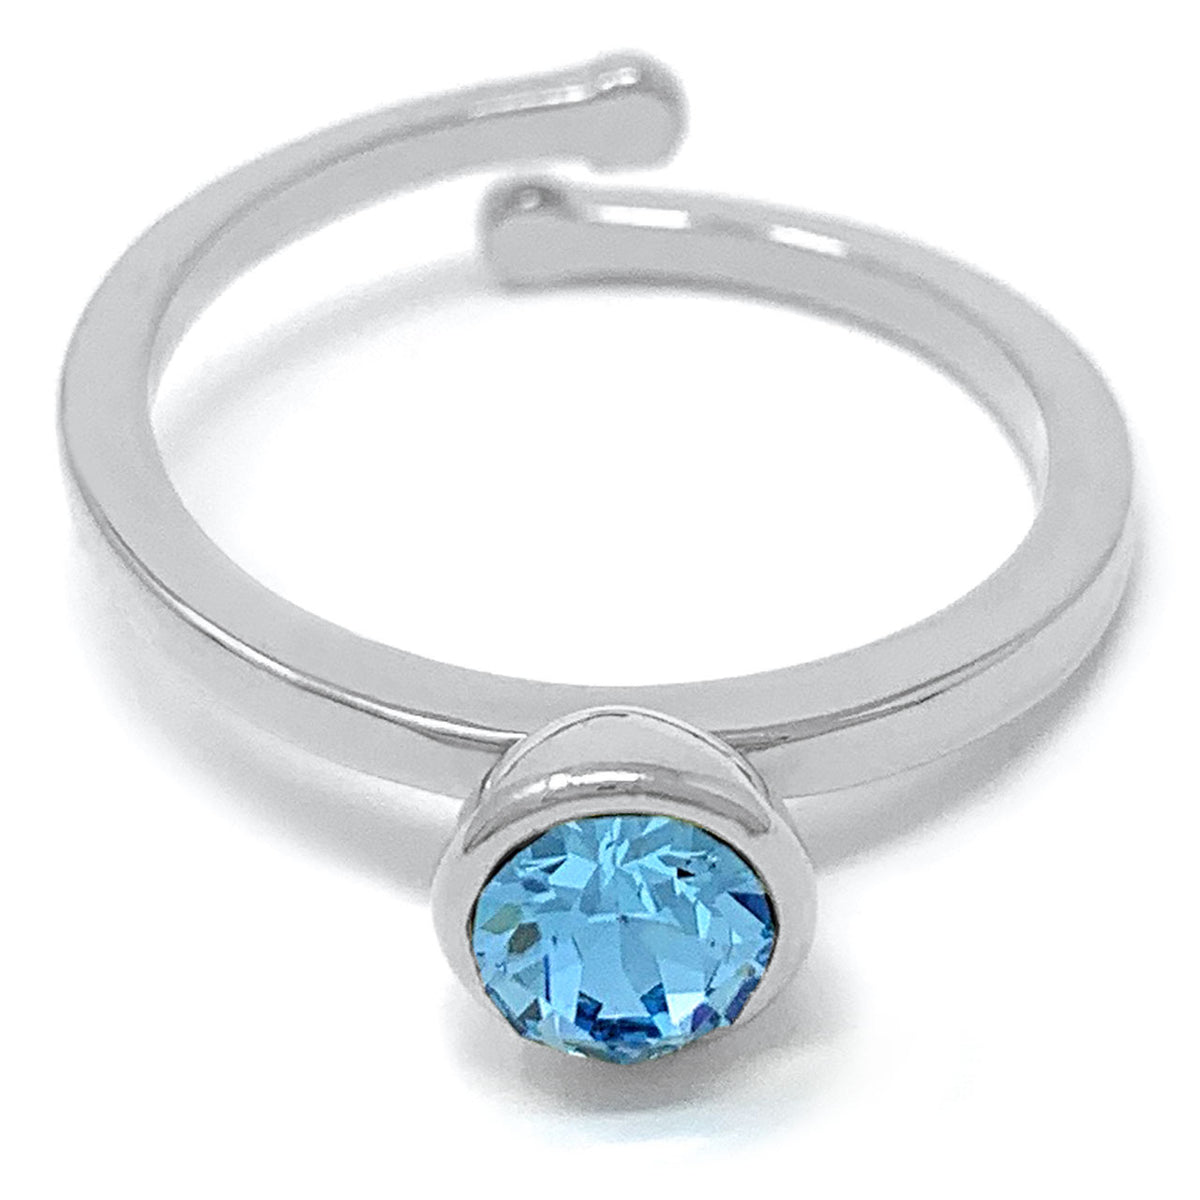 Harley Adjustable Ring with Blue Aquamarine Round Crystals from Swarovski Silver Toned Rhodium Plated - Ed Heart